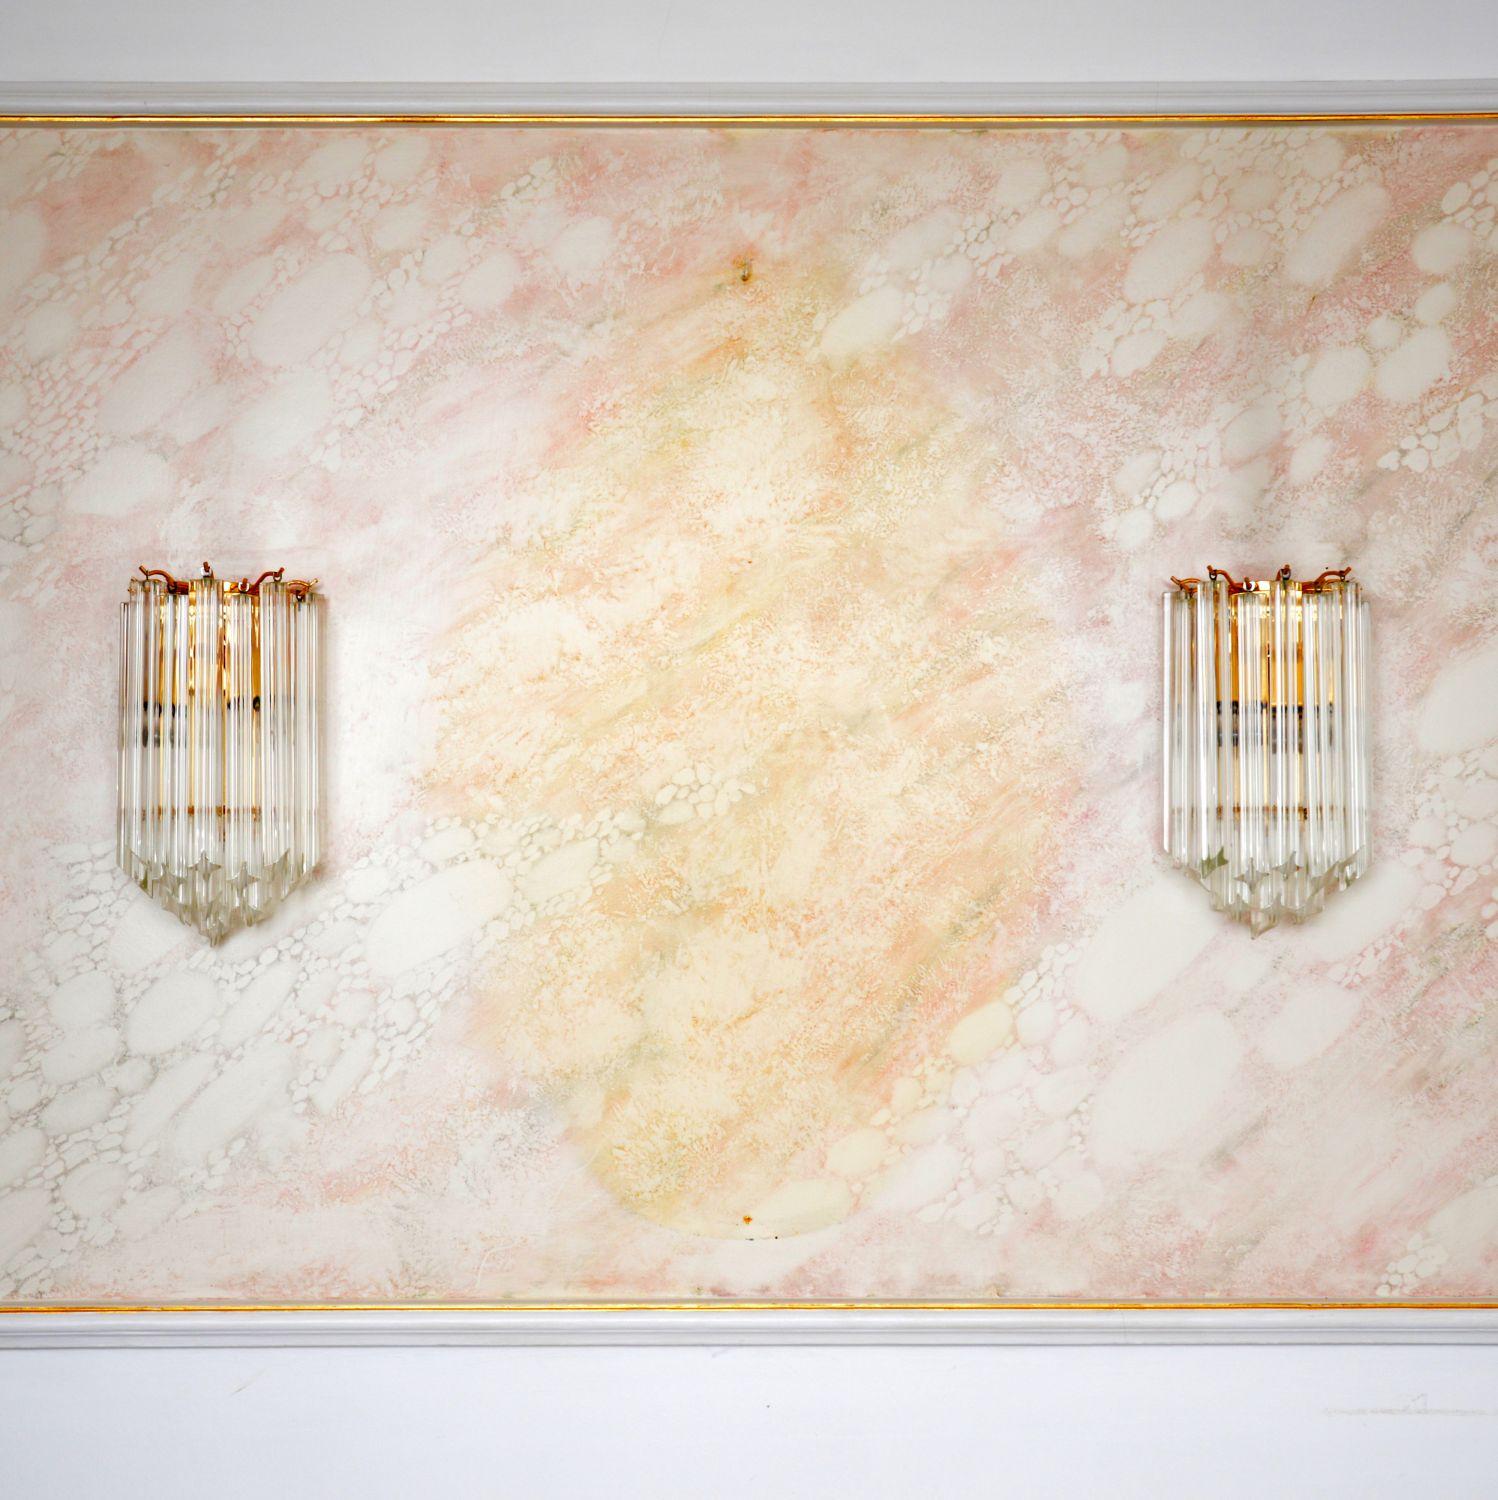 A stunning pair of original Paulo Venini wall sconce lamps in Murano glass and brass. They were made in Italy, and date from the 1970-1980s.

They are of incredible quality, with individual hand cut Murano glass drops hanging from the brass frames.